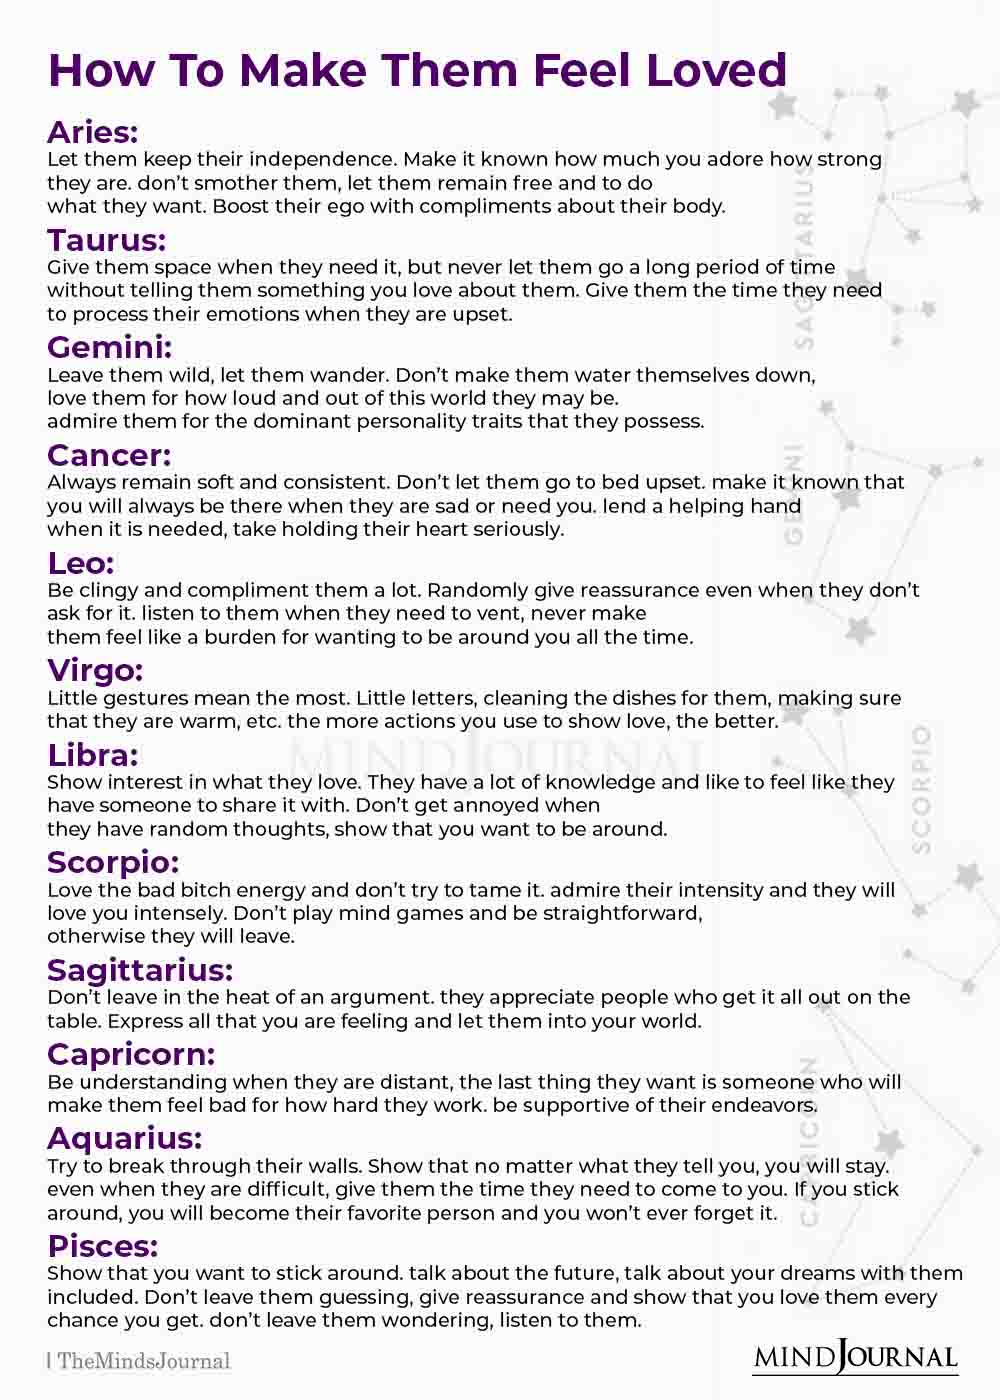 How To Make The Zodiac Signs Feel Loved